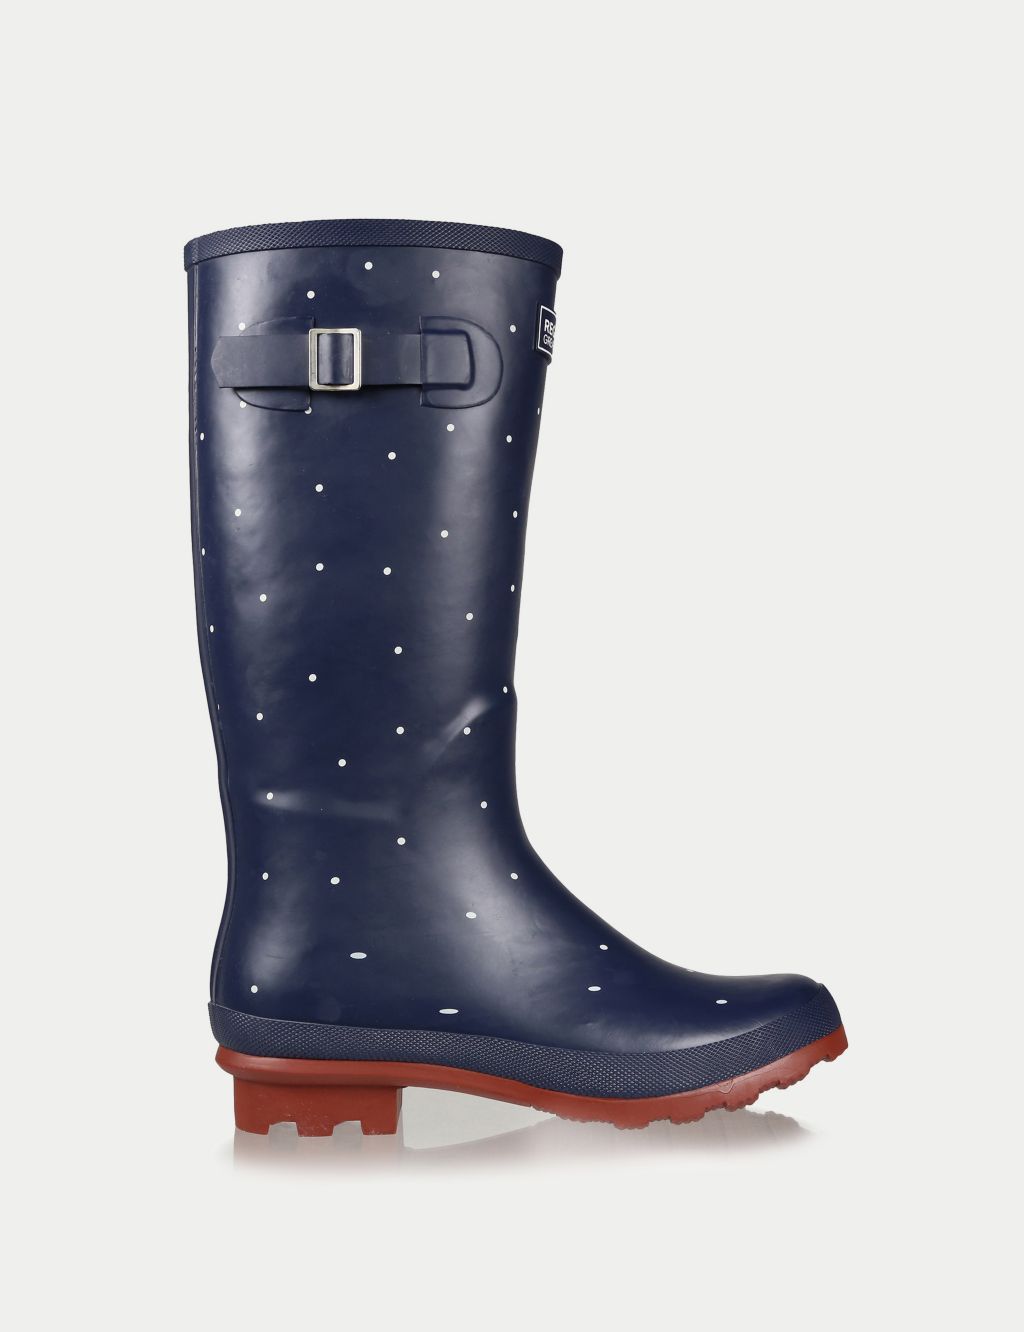 Lady Fairweather II Patterned Wellies